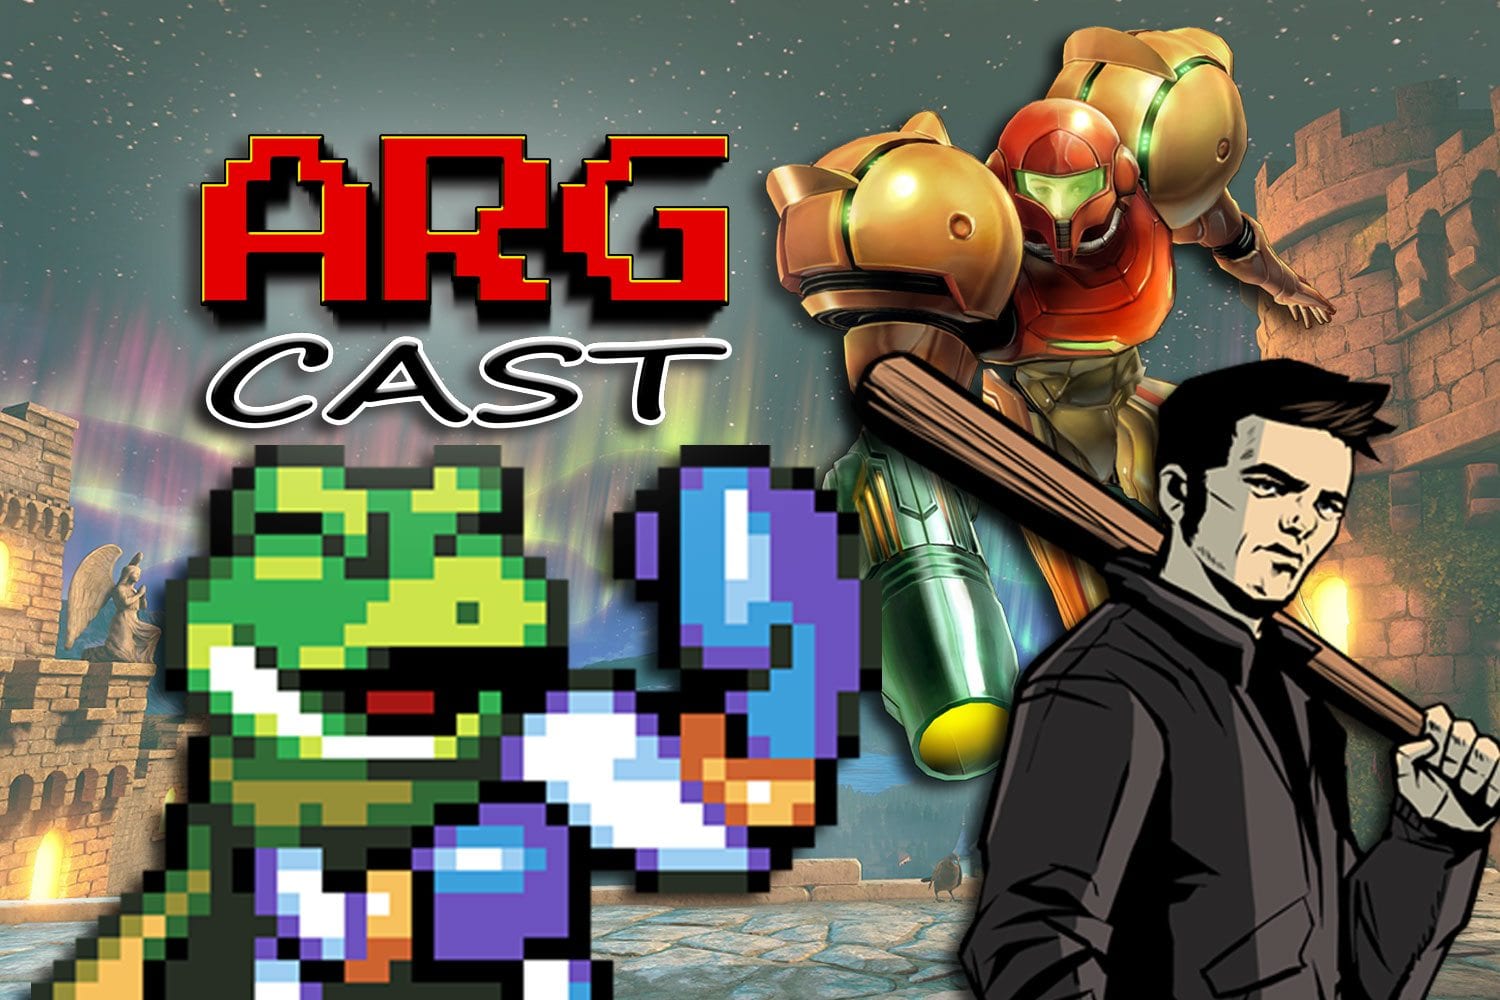 ARGcast #108: "Perfect" Video Games with Mister Megative